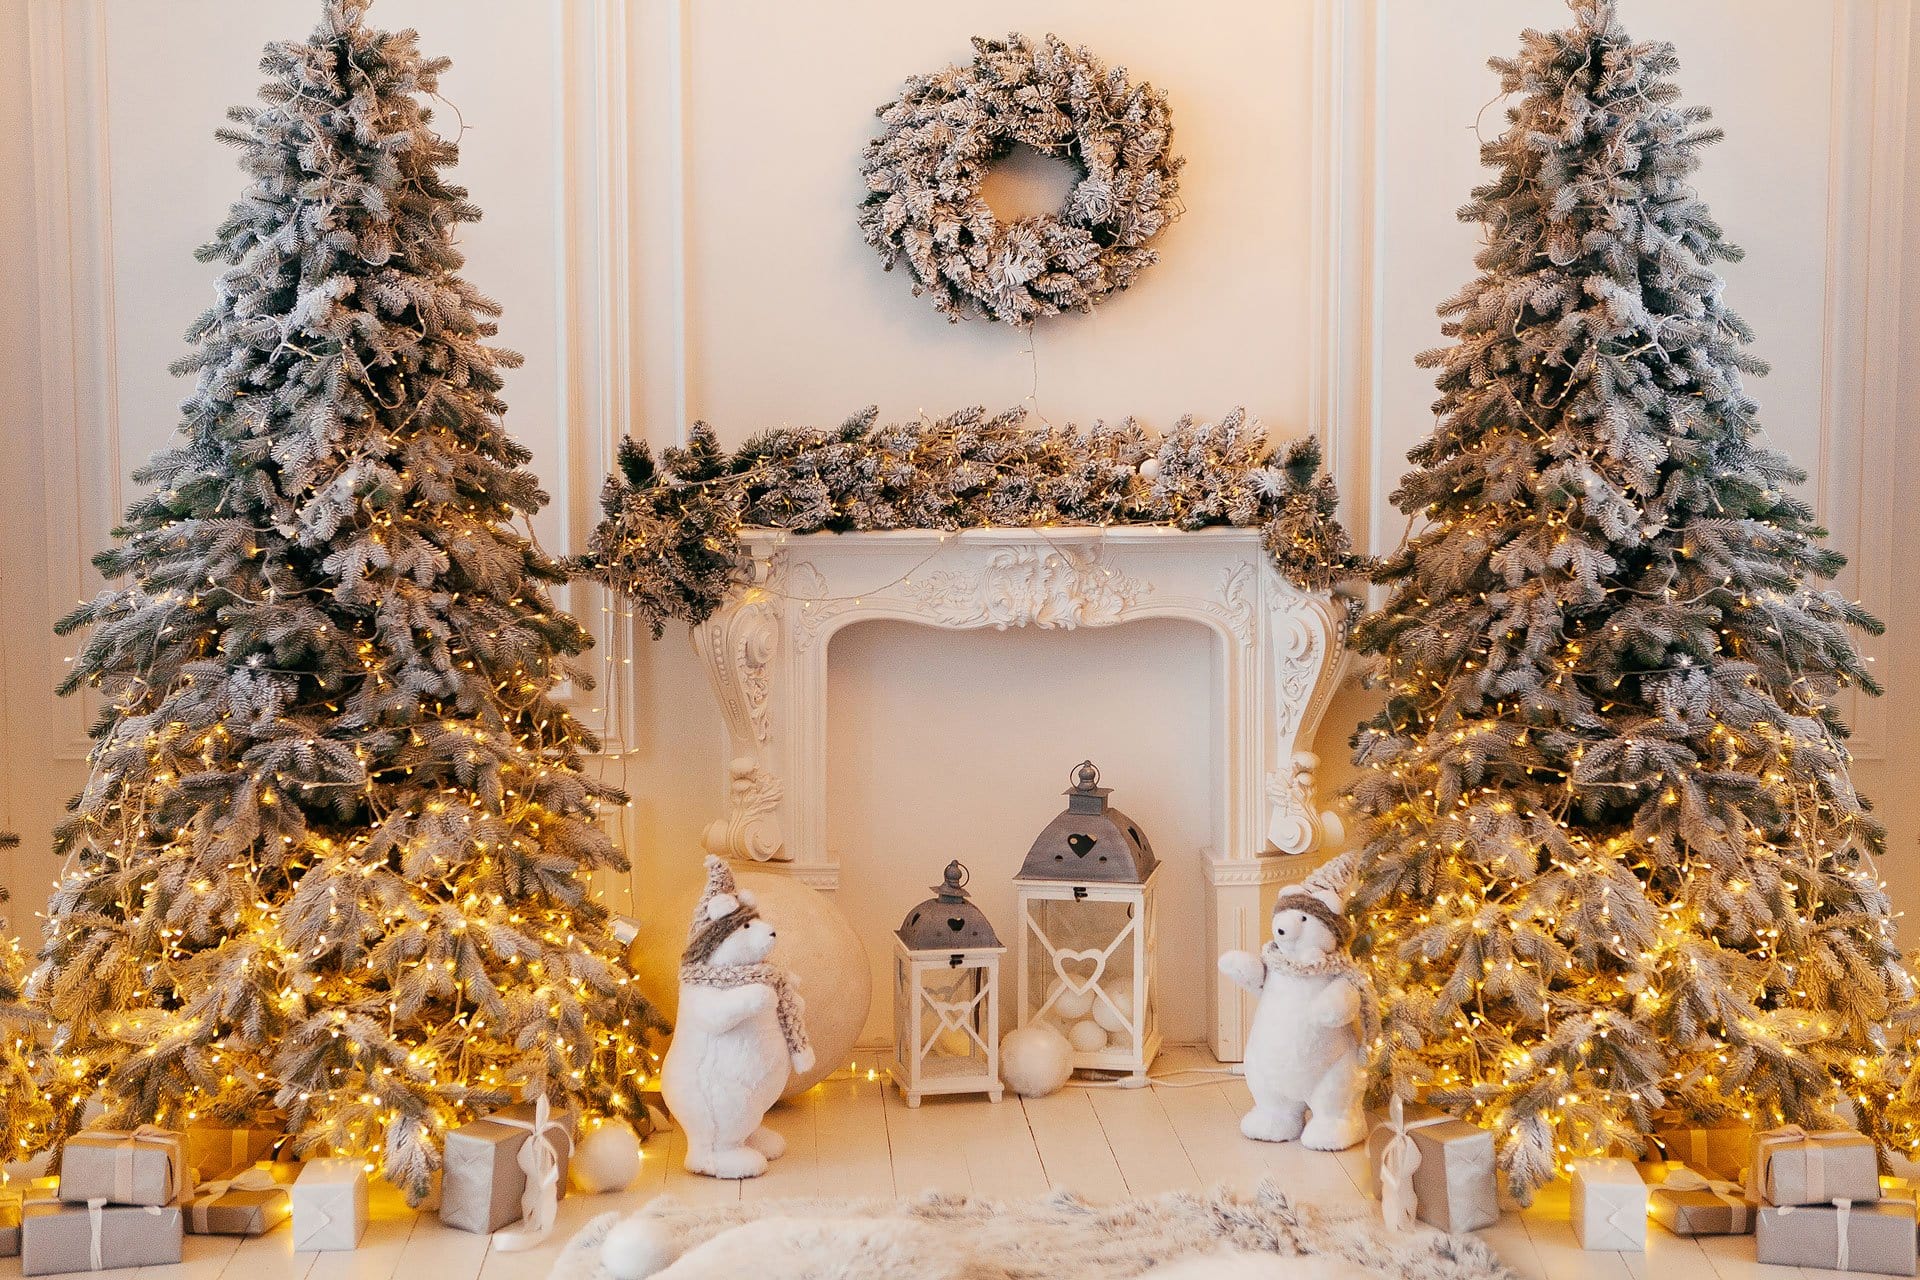 Kate Simple White Christmas Decorations Backdrop Designed By Jerry_Sin